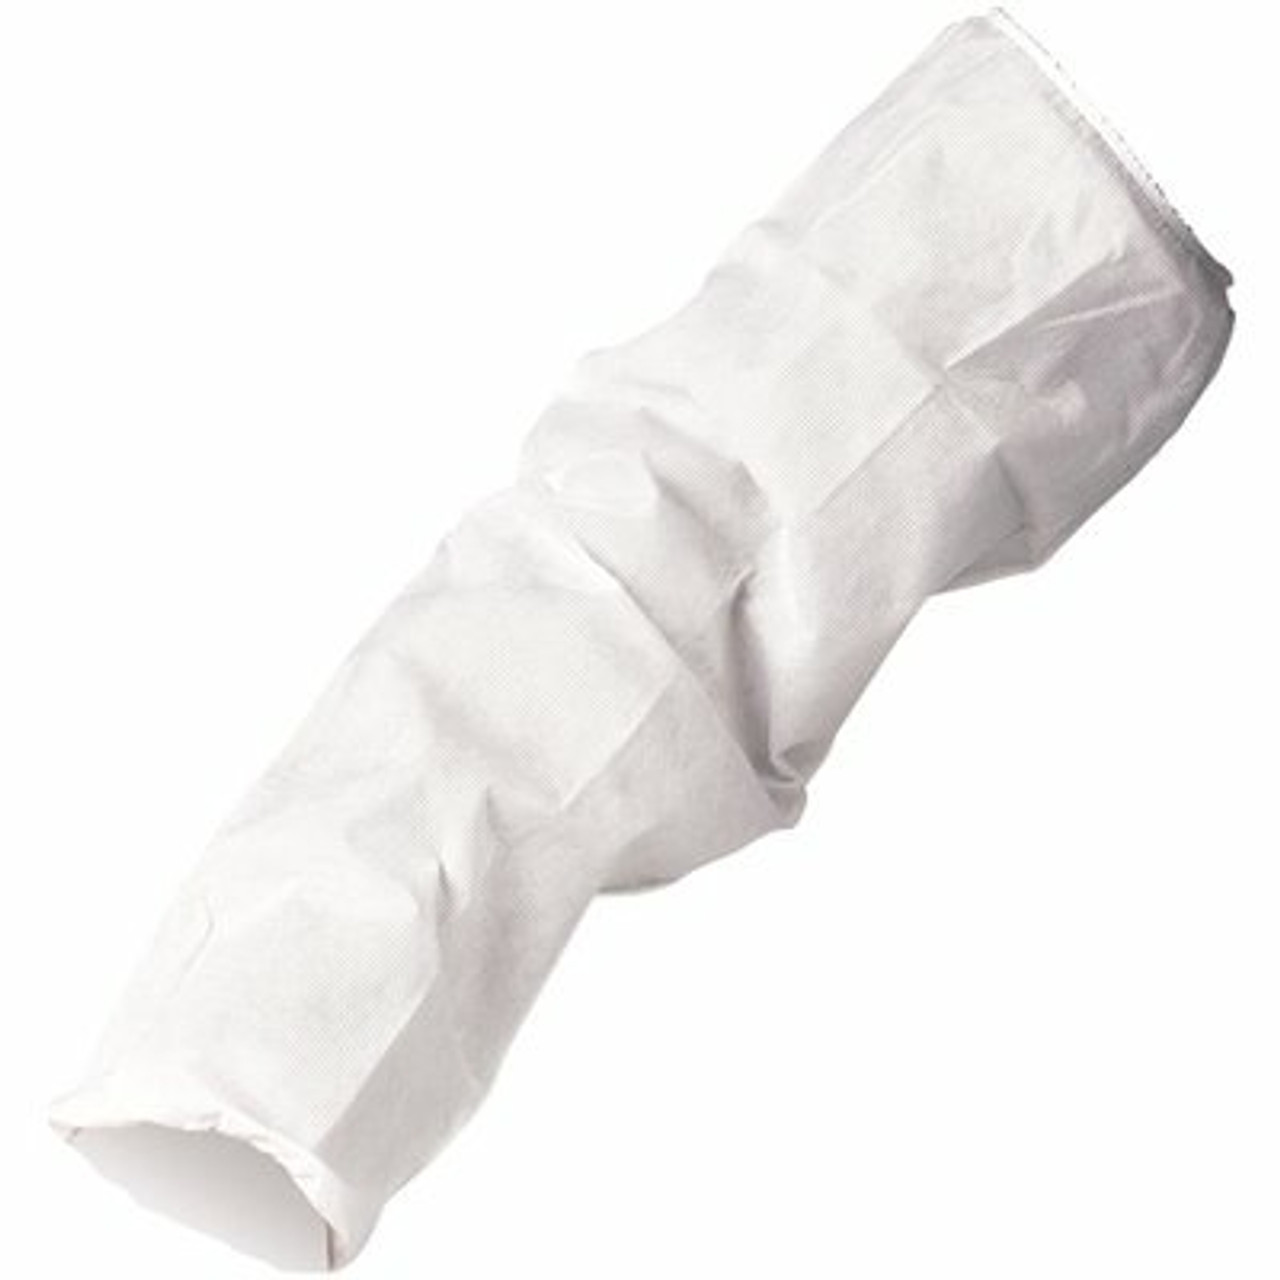 A20 Breathable Particle Protection Sleeve Protectors (36870), Serged Seam, Elastic Tops & Wrists, 21", White, 200 / Case